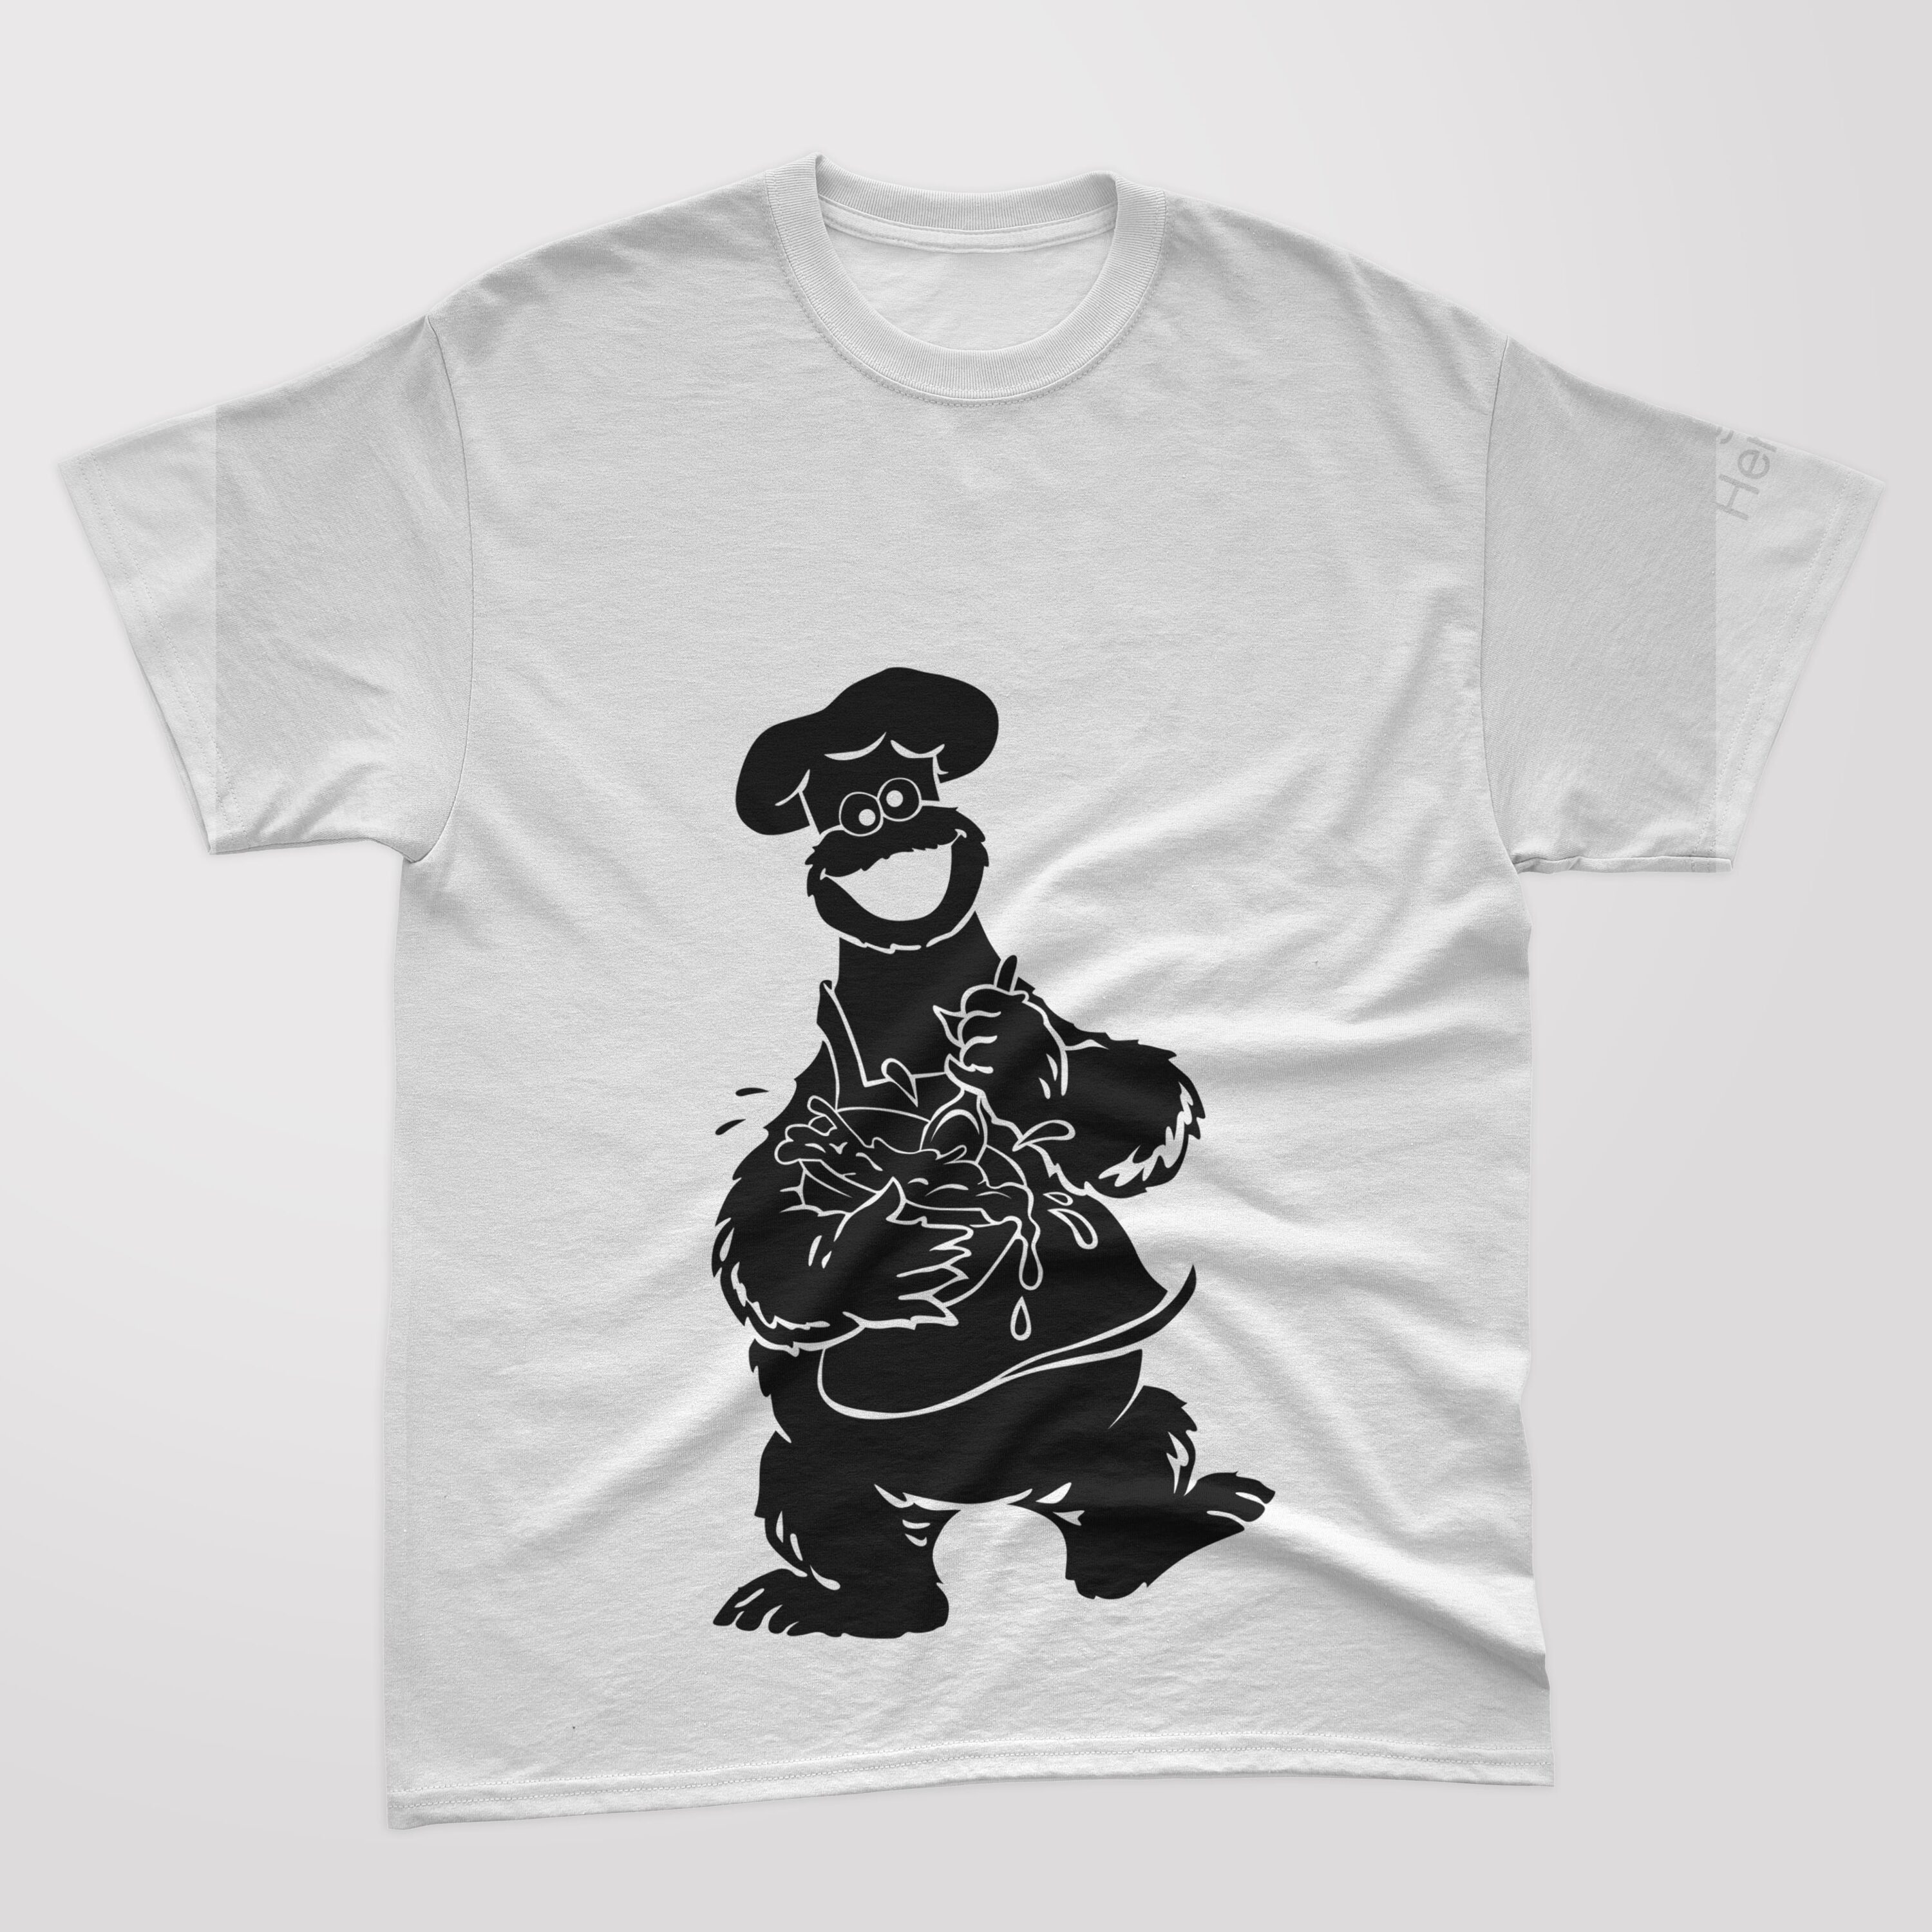 A white t-shirt with a black silhouette cookie monster, who cooks food.